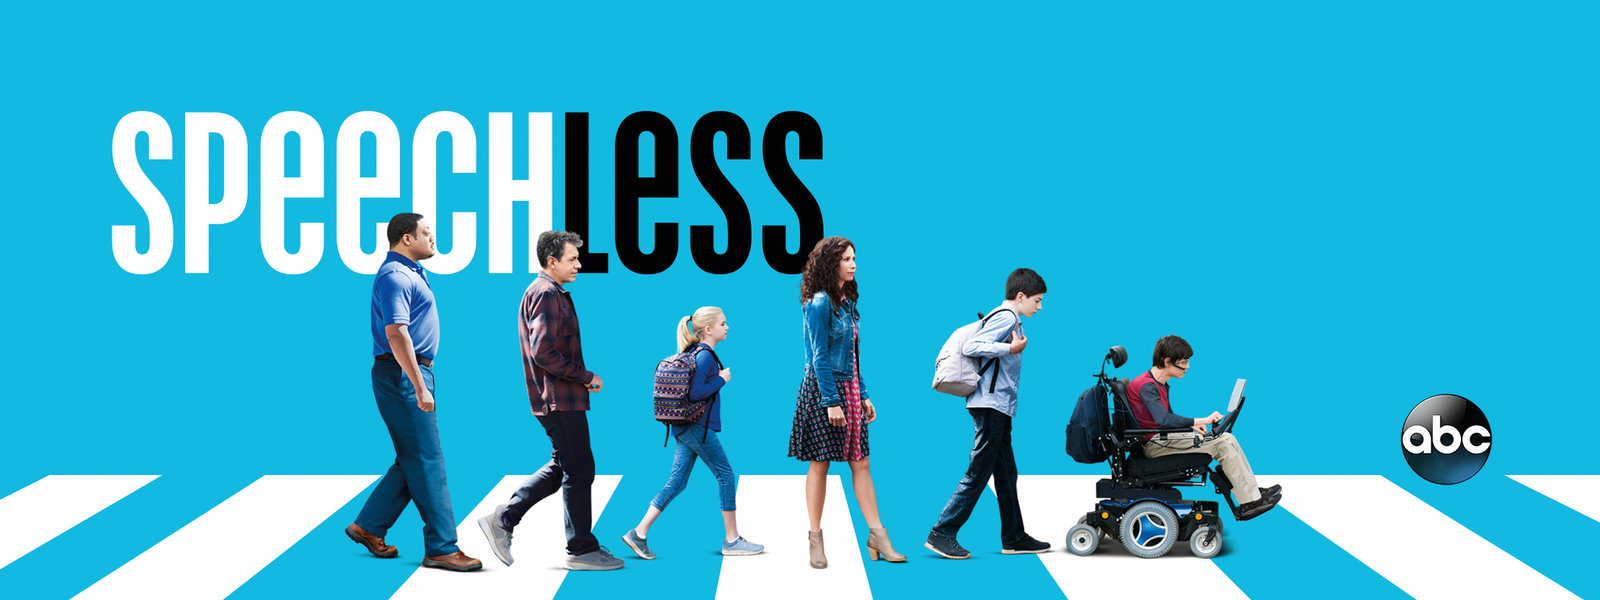 Speechless promo image with word Speechless and showing the characters walking toward the right